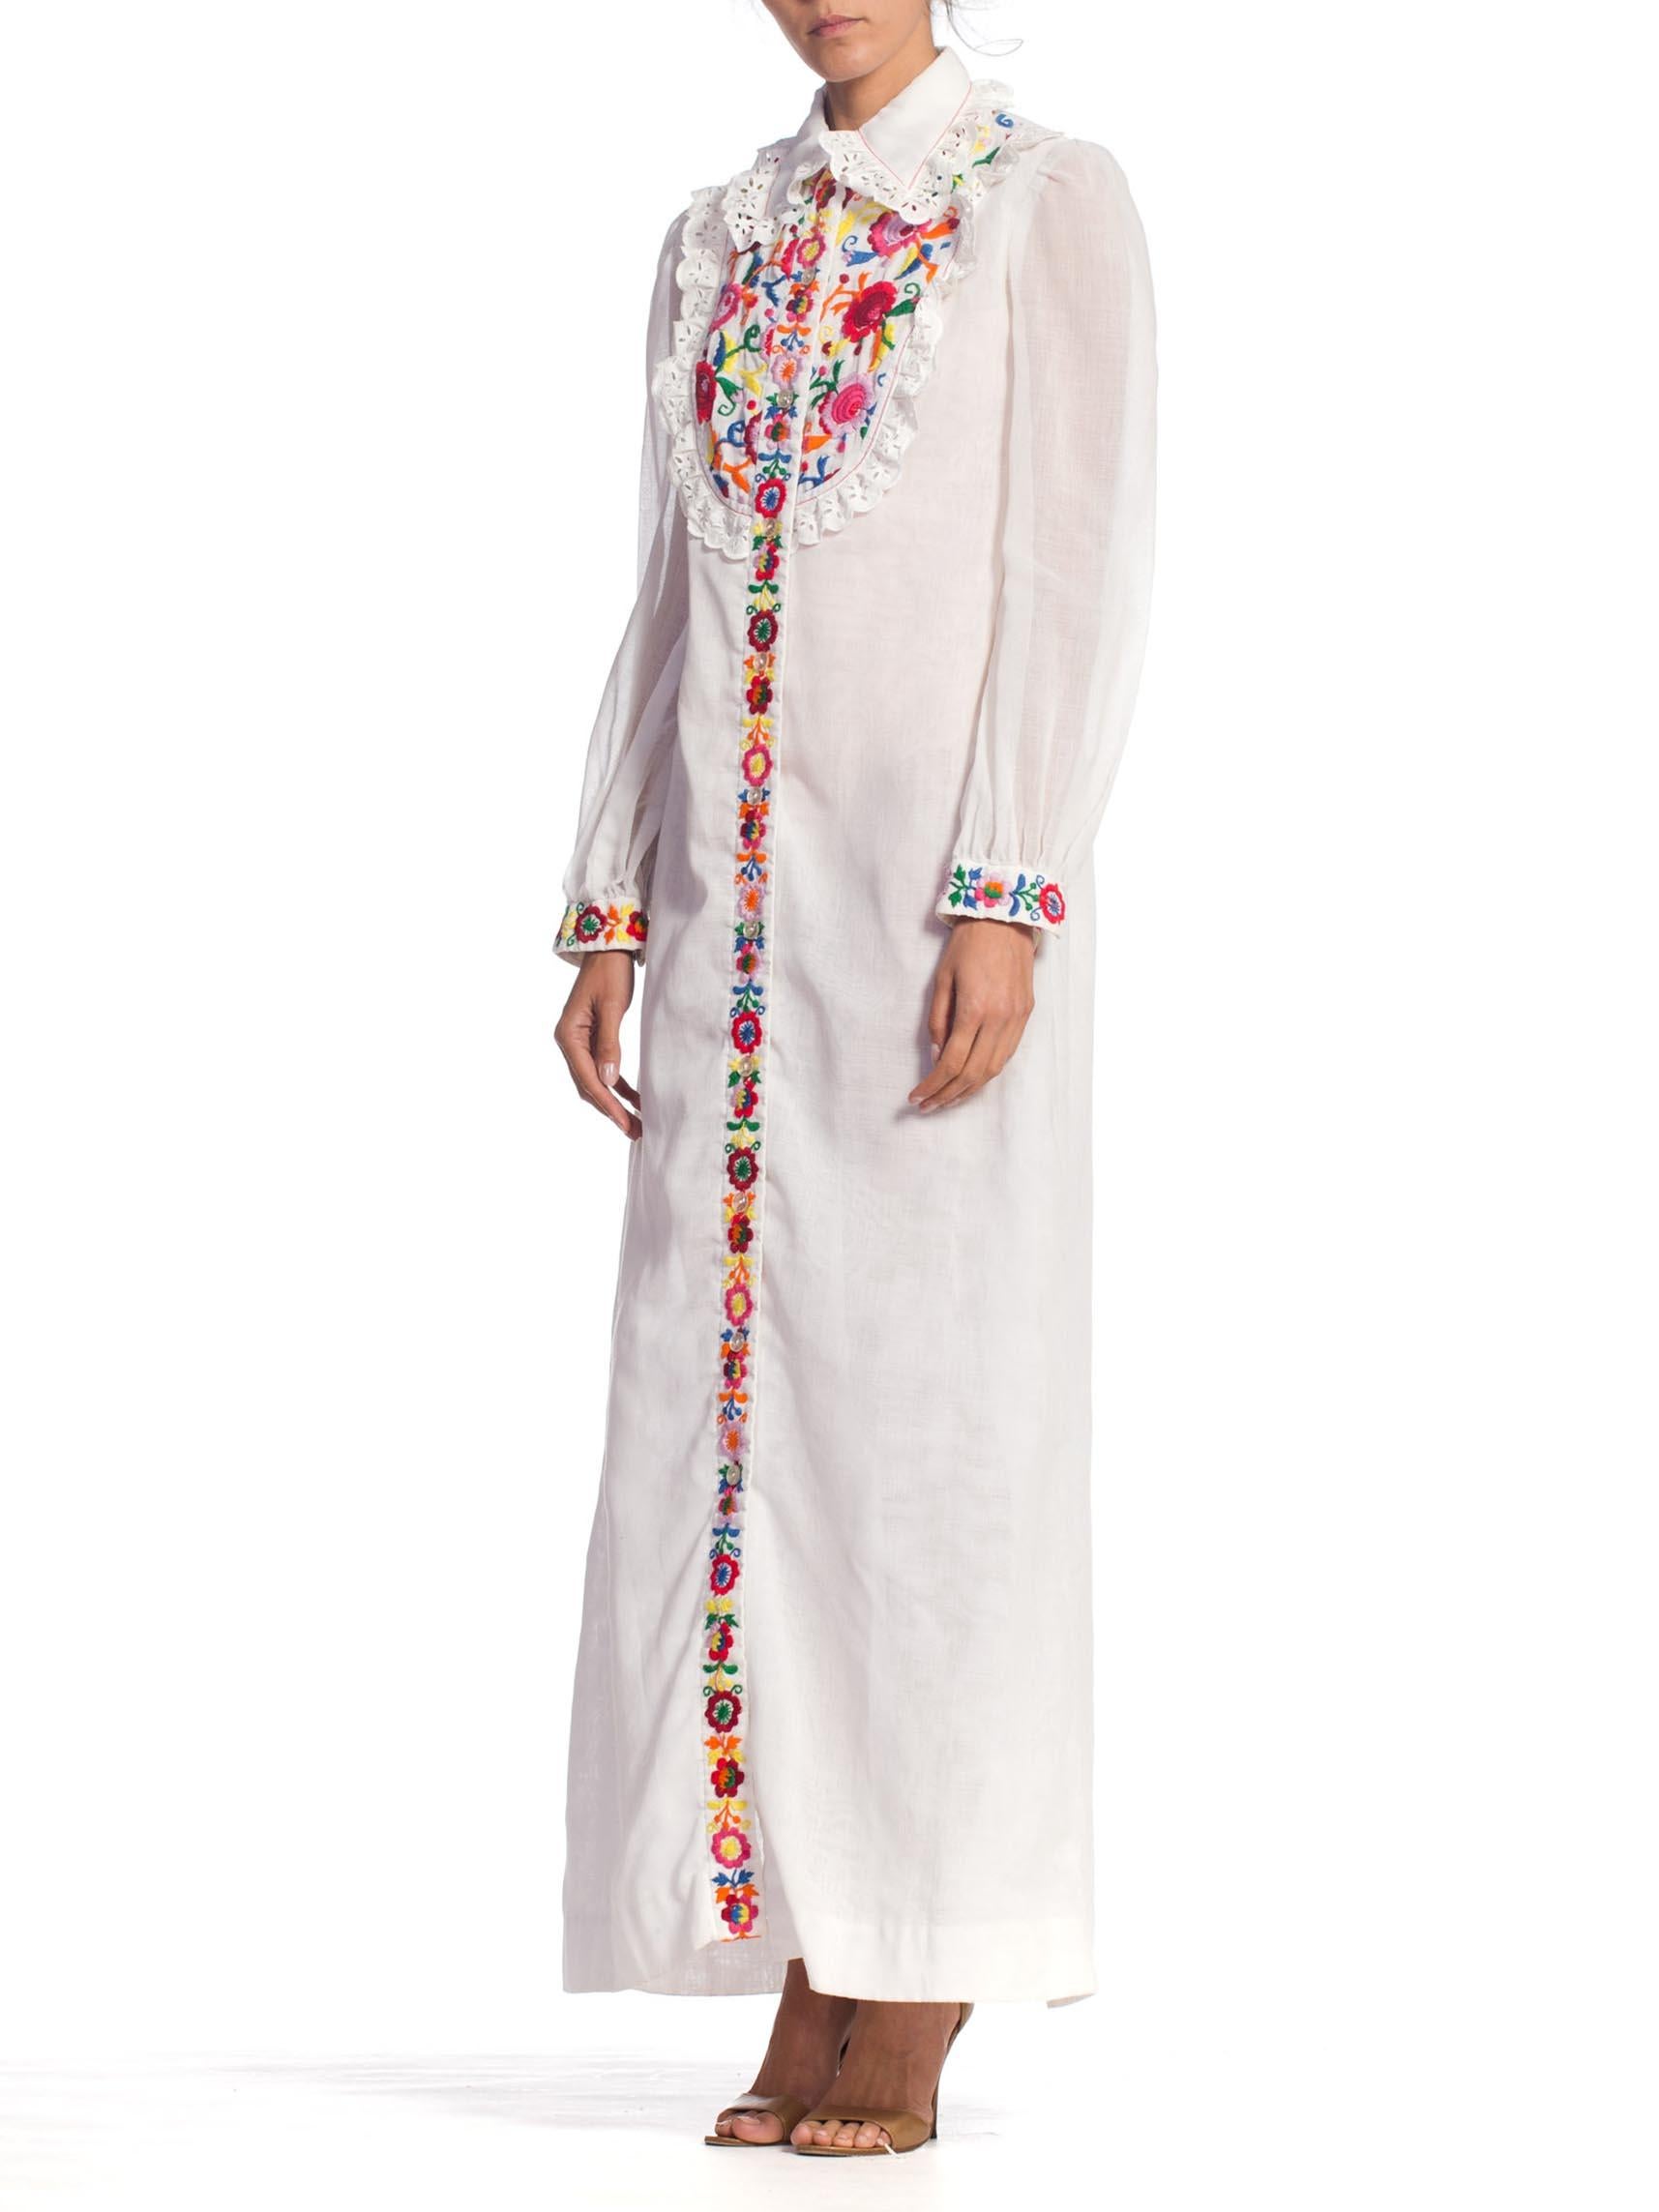 Women's 1970S White Cotton Blend Shirt Dress With Floral Embroidery And Vintage Lace